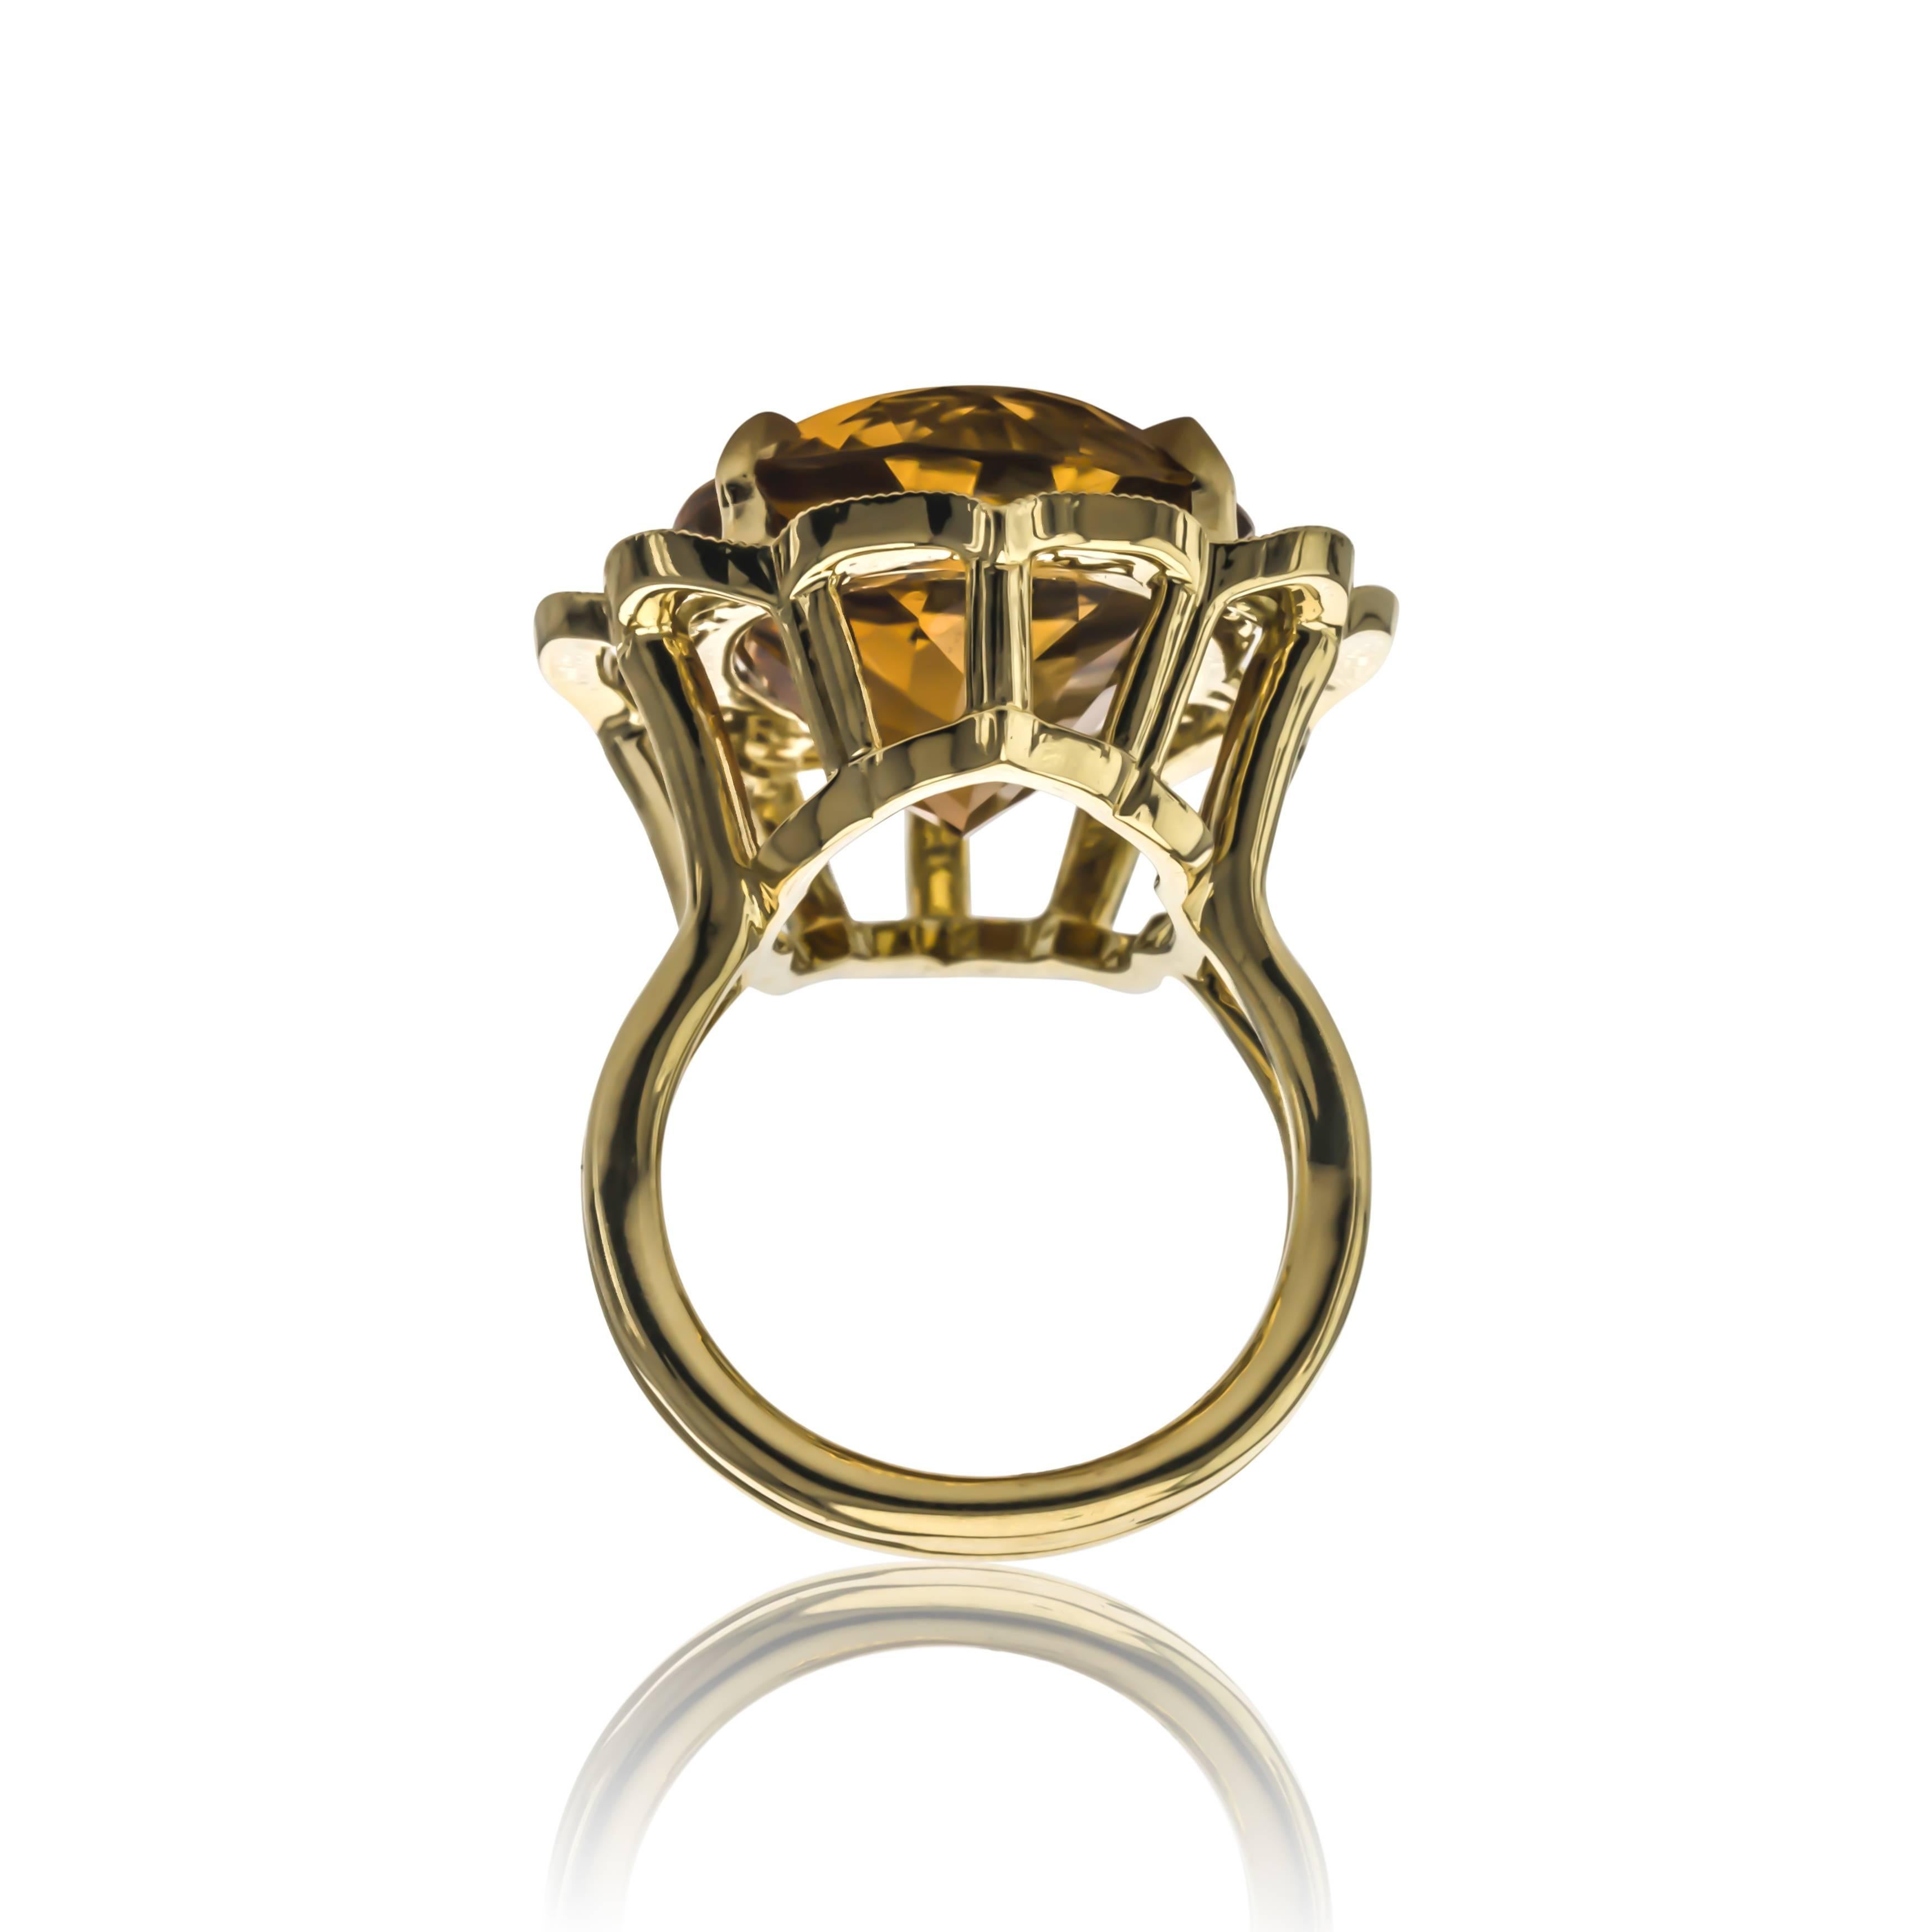 Women's One of a Kind 23.27 Carat Orange Tourmaline Diamond Gold Cocktail Ring For Sale